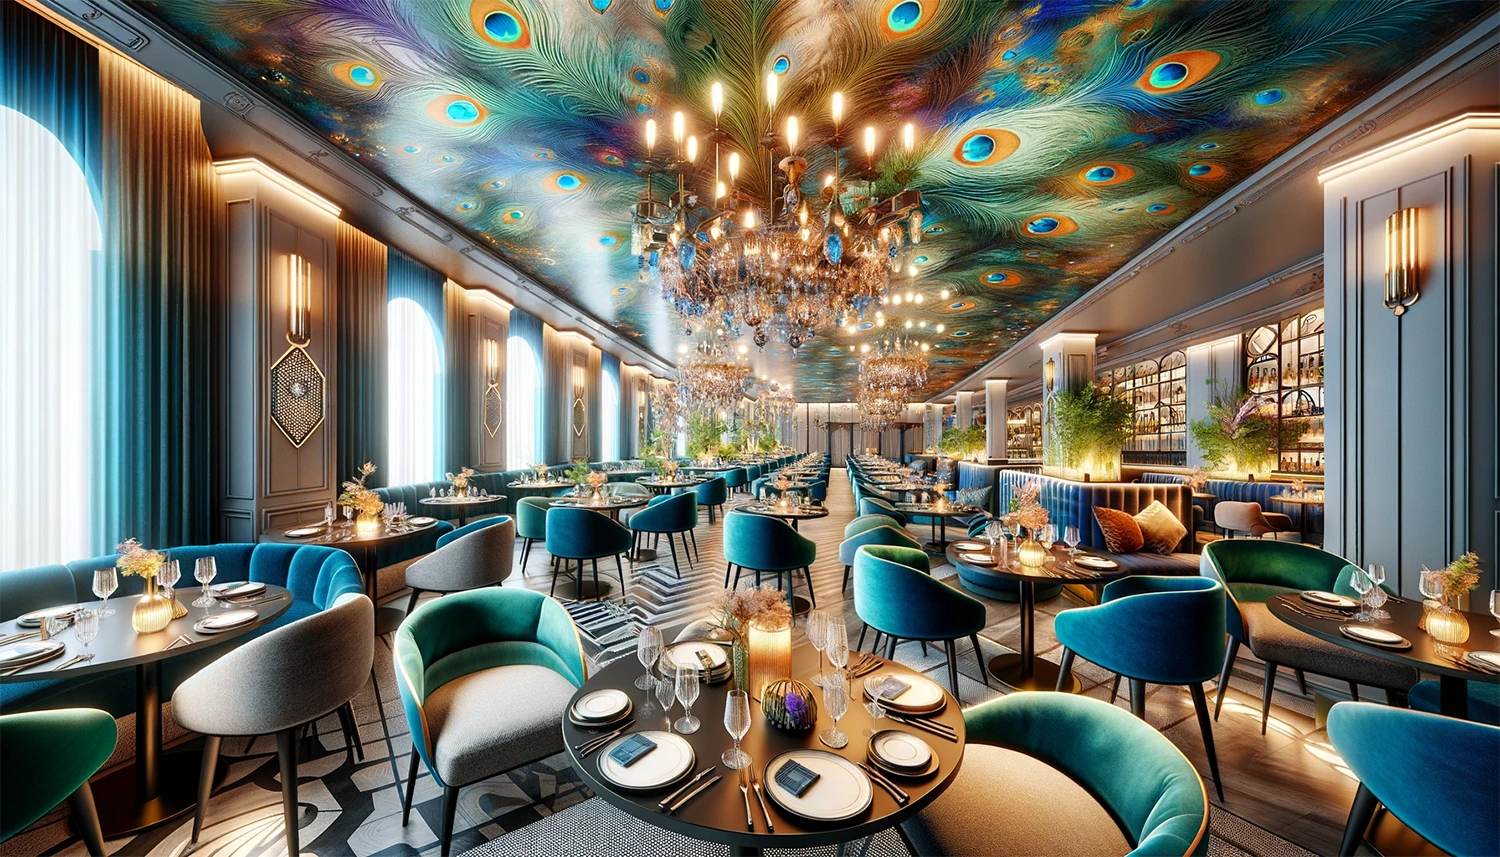 A restaurant with peacock feathers on the ceiling representing the latest hospitality and restaurant trends for 2024.